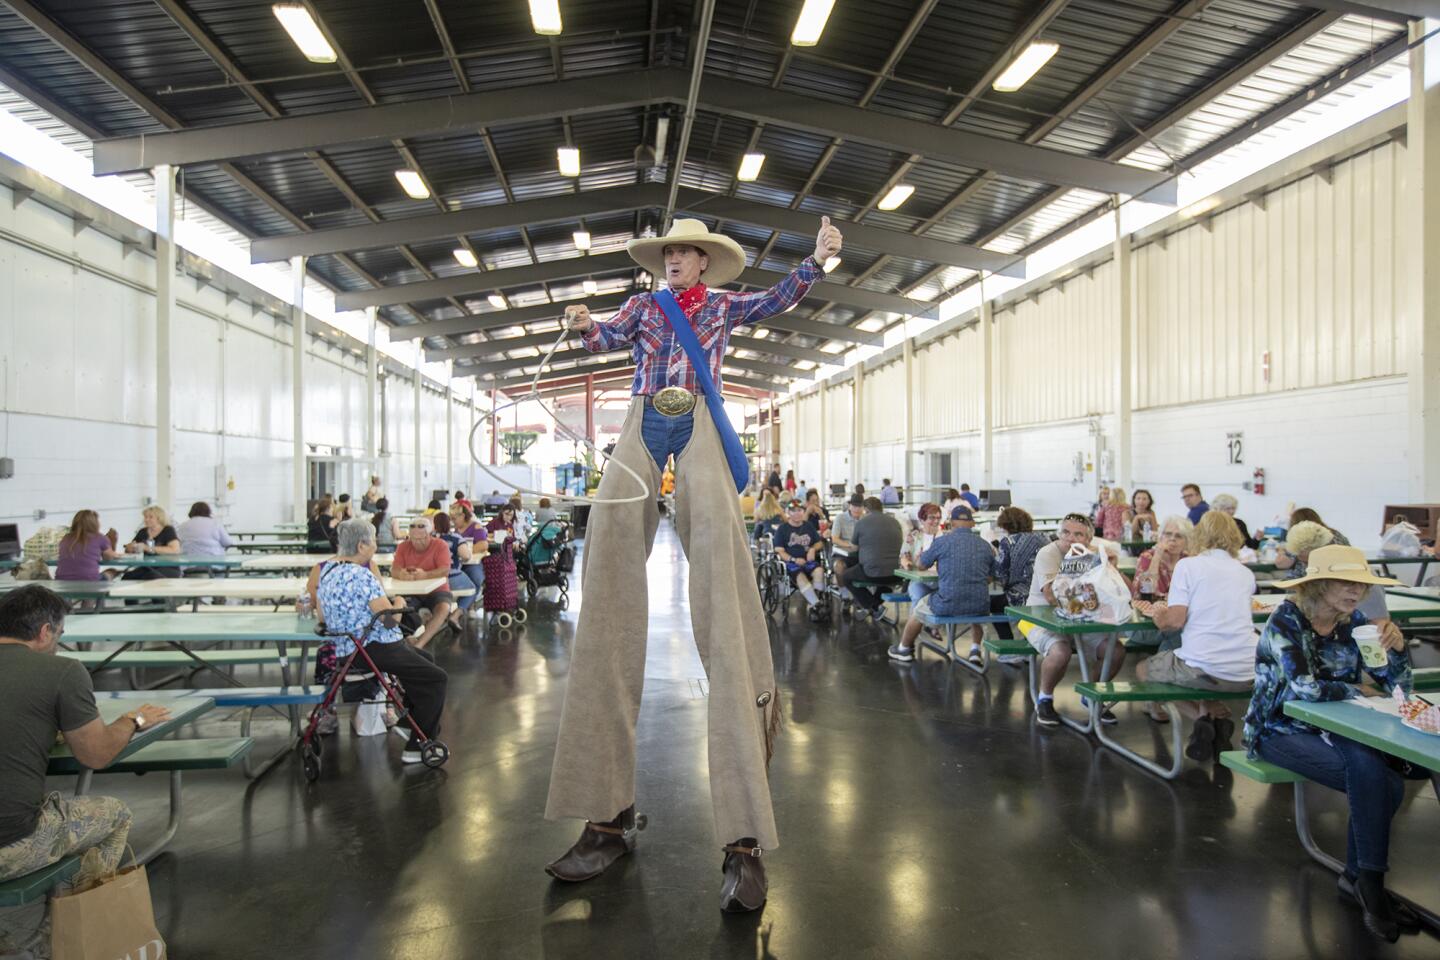 Bill Witter, performing as WC Willy, stilt-walks at the Harvest Festival at the Orange County fairgrounds.